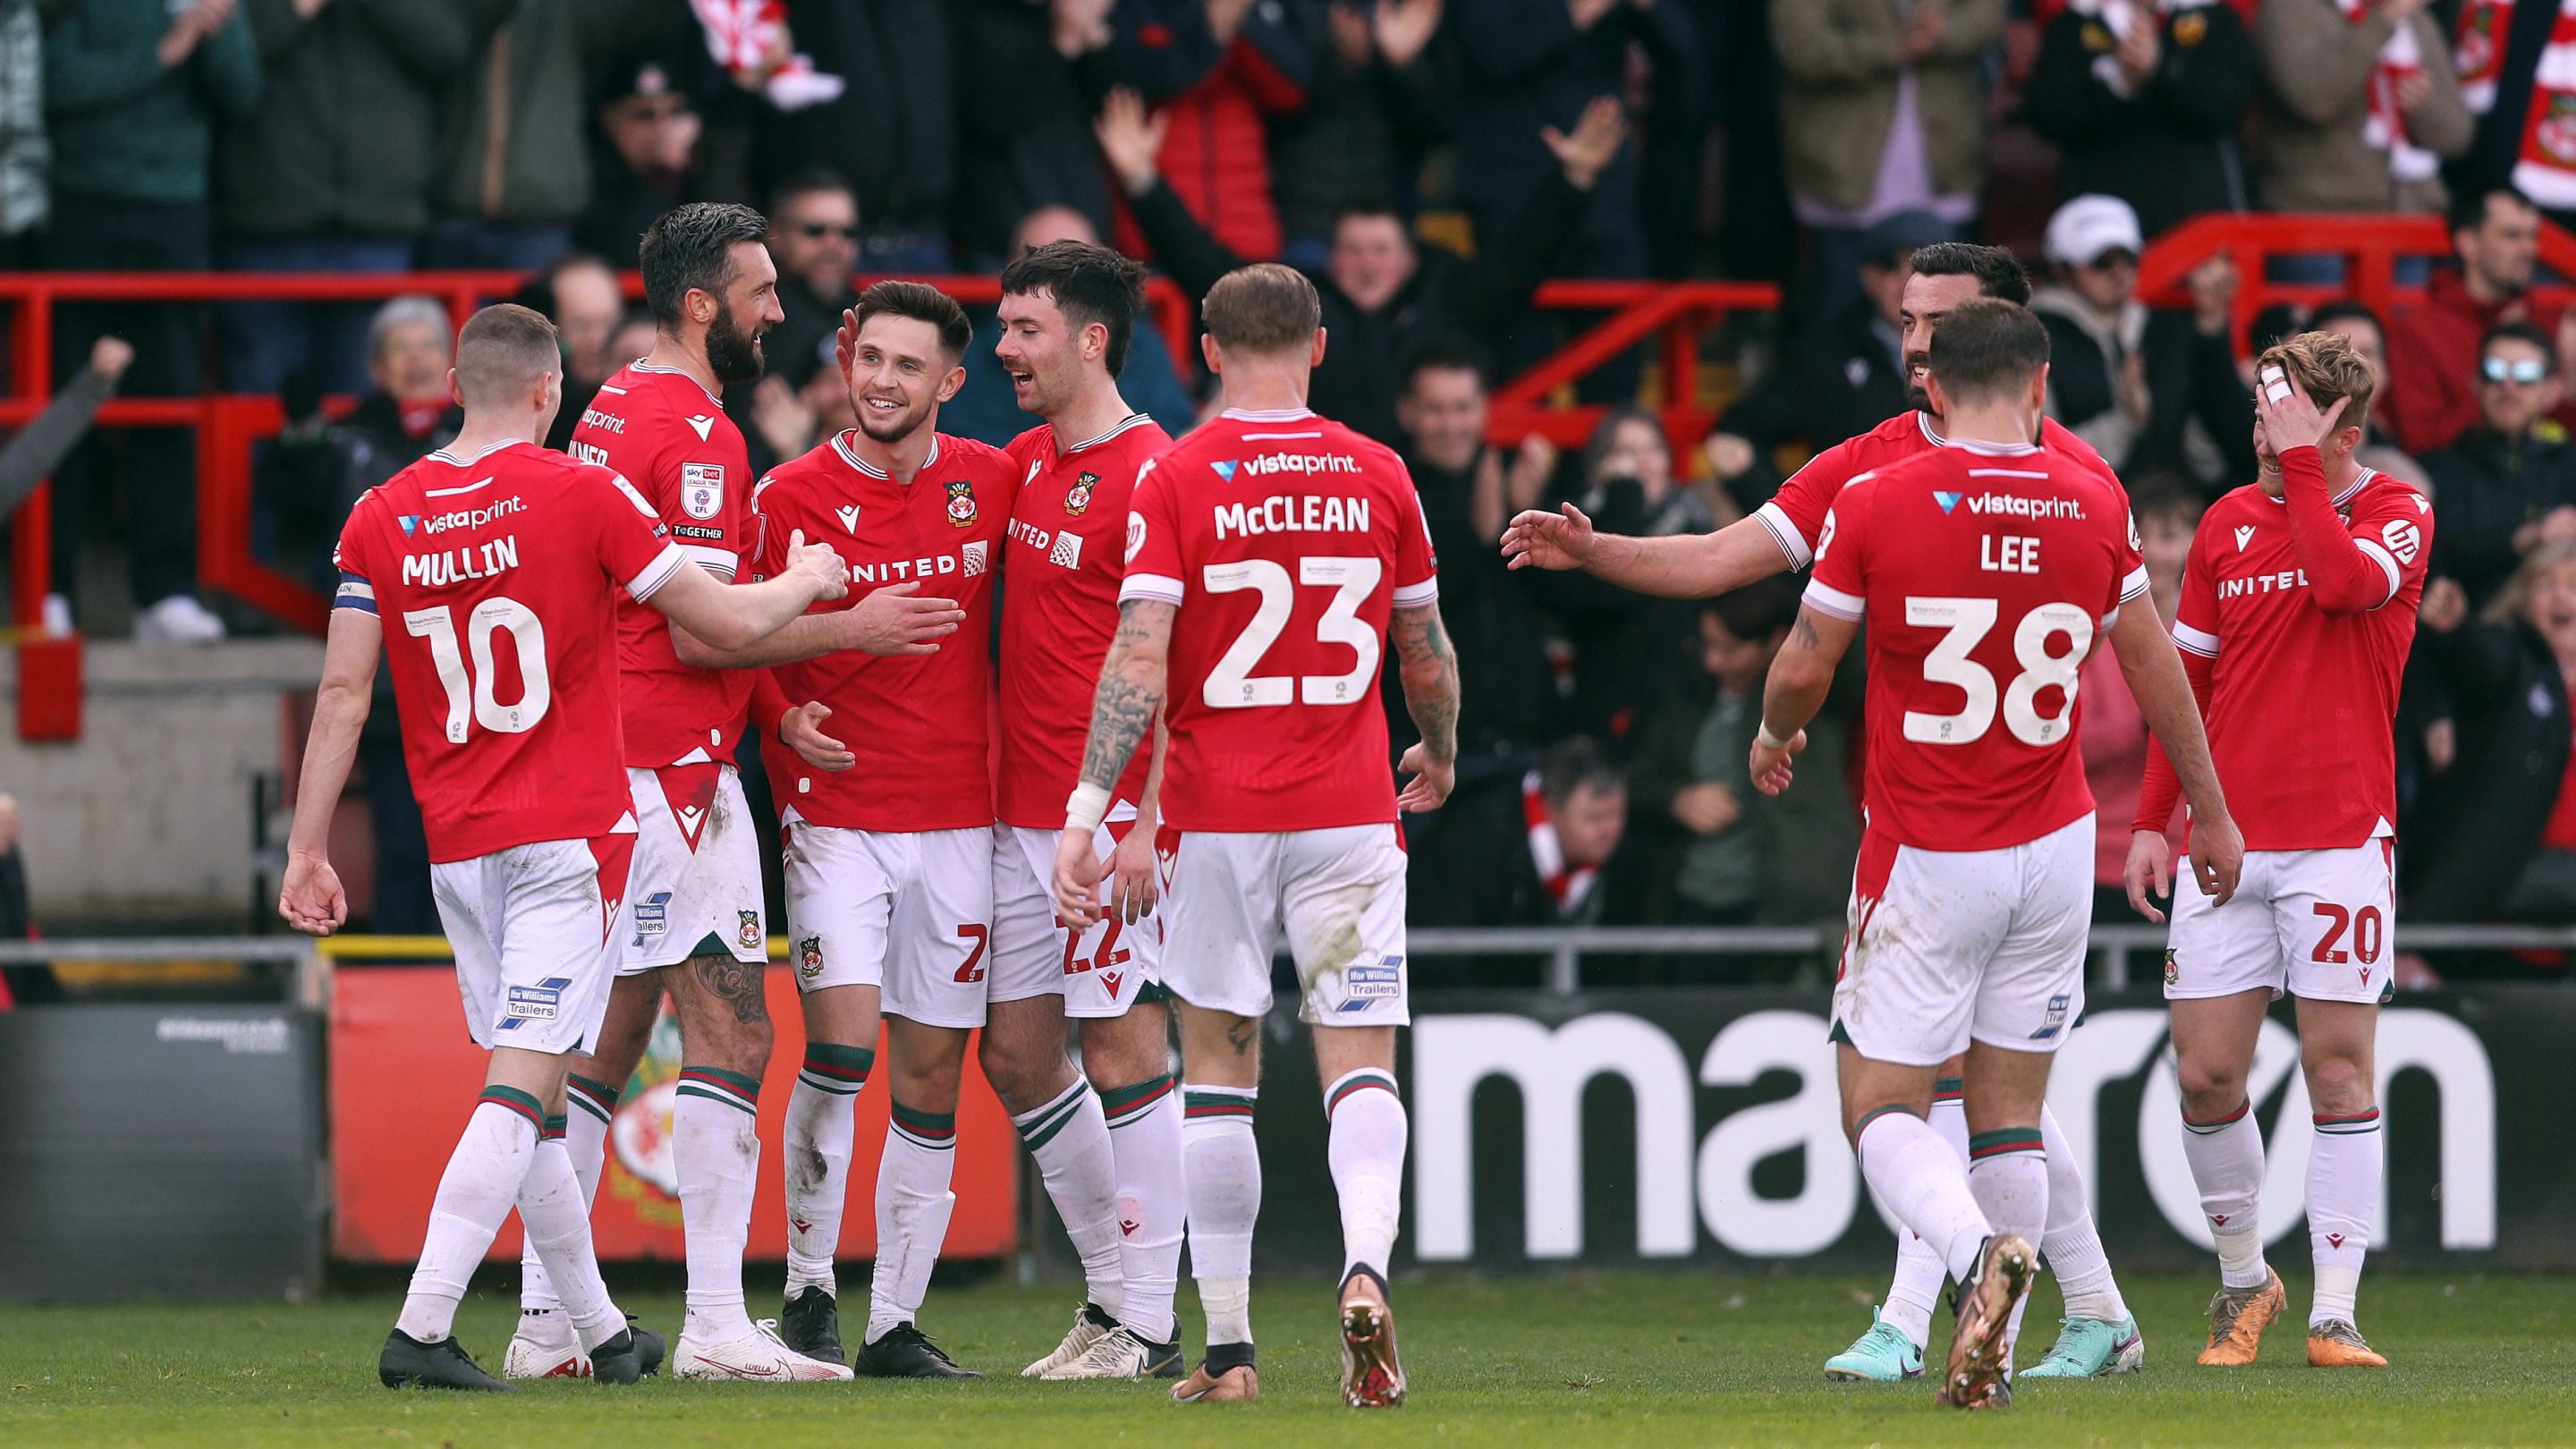 Wrexham promoted to League One